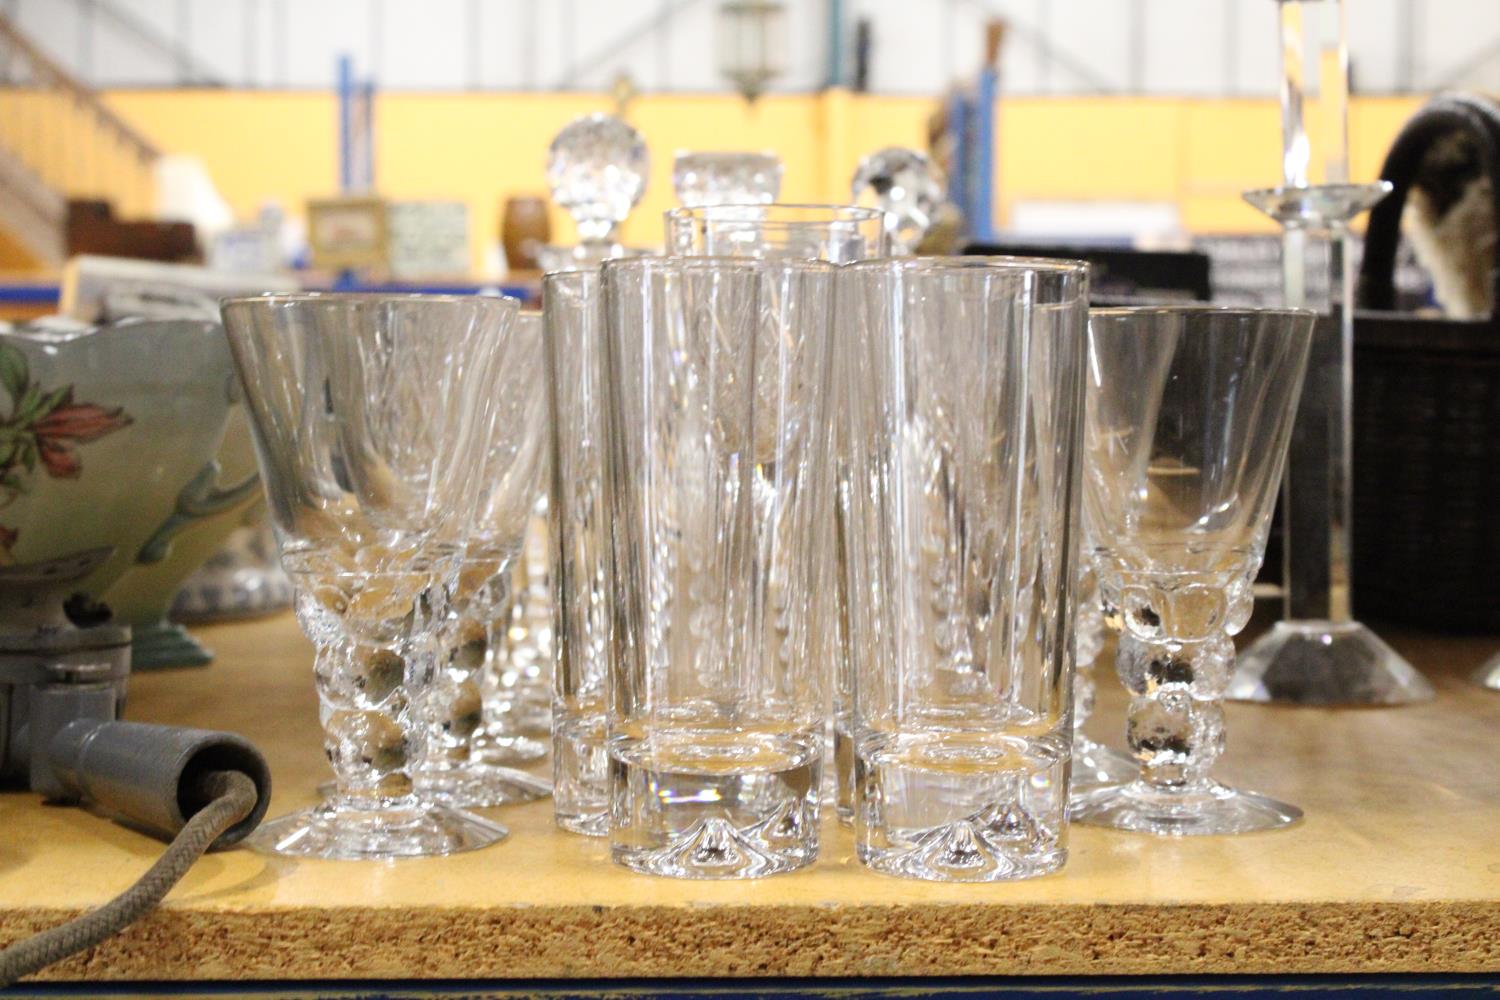 A QUANTITY OF GLASSWARE TO INCLUDE DECANTERS, WINE GLASSES, TUMBLERS, ETC - Image 5 of 5